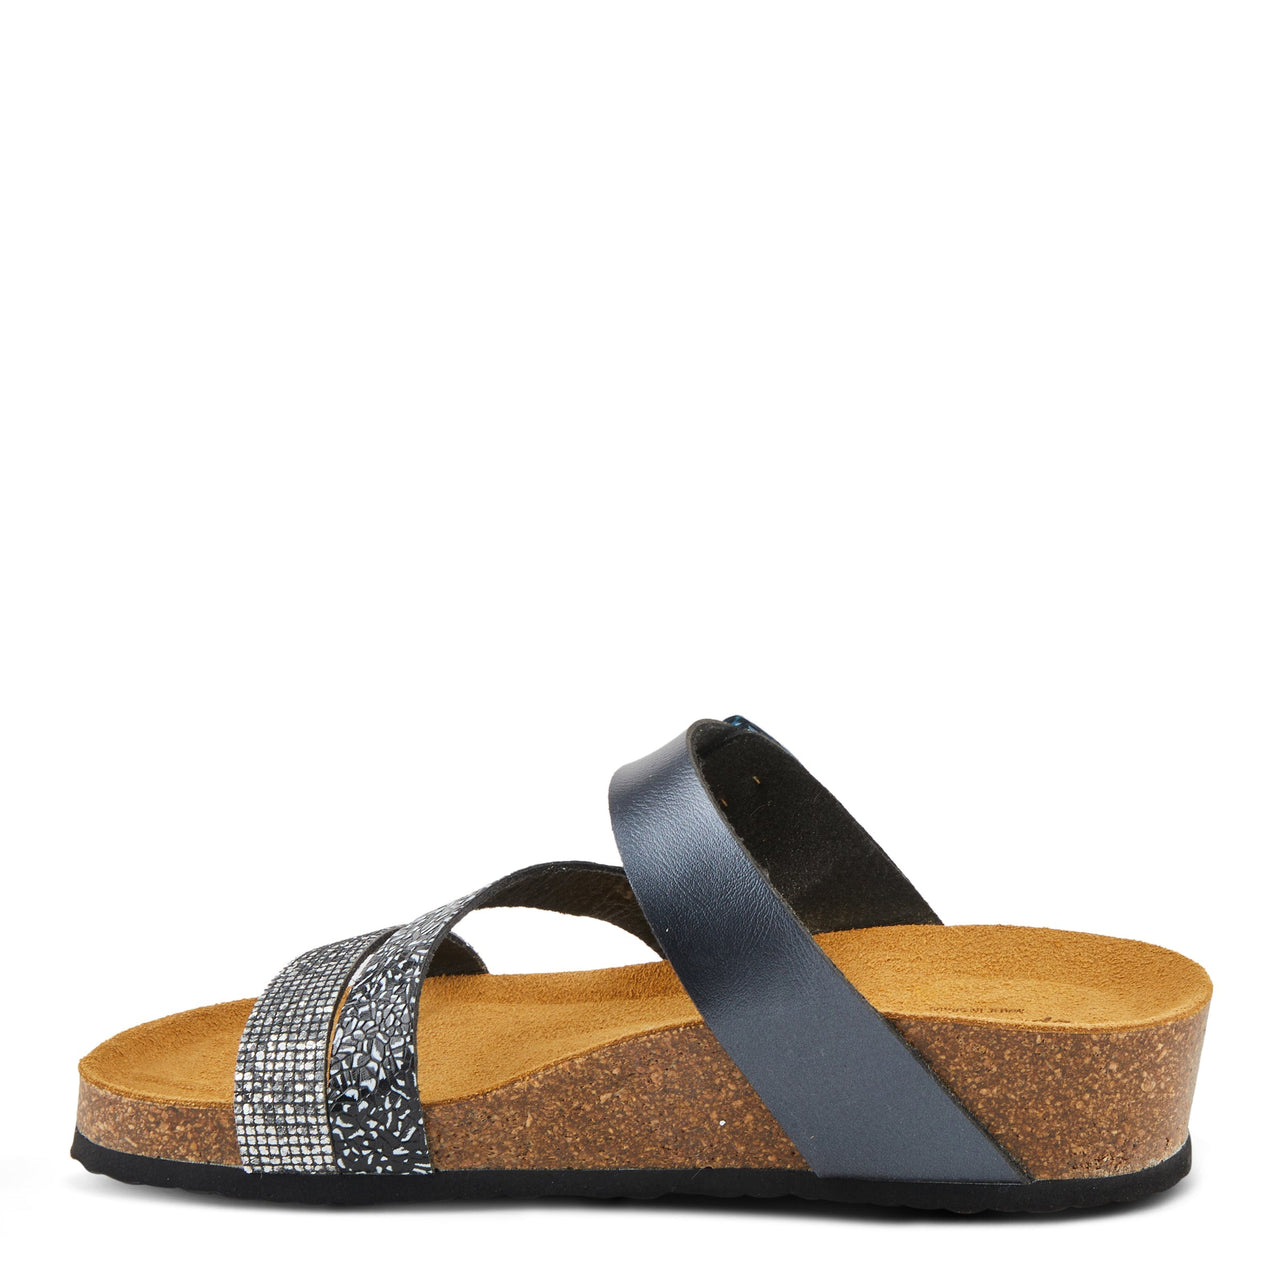 Spring Step Arenall Sandals in black leather with floral design and adjustable ankle strap